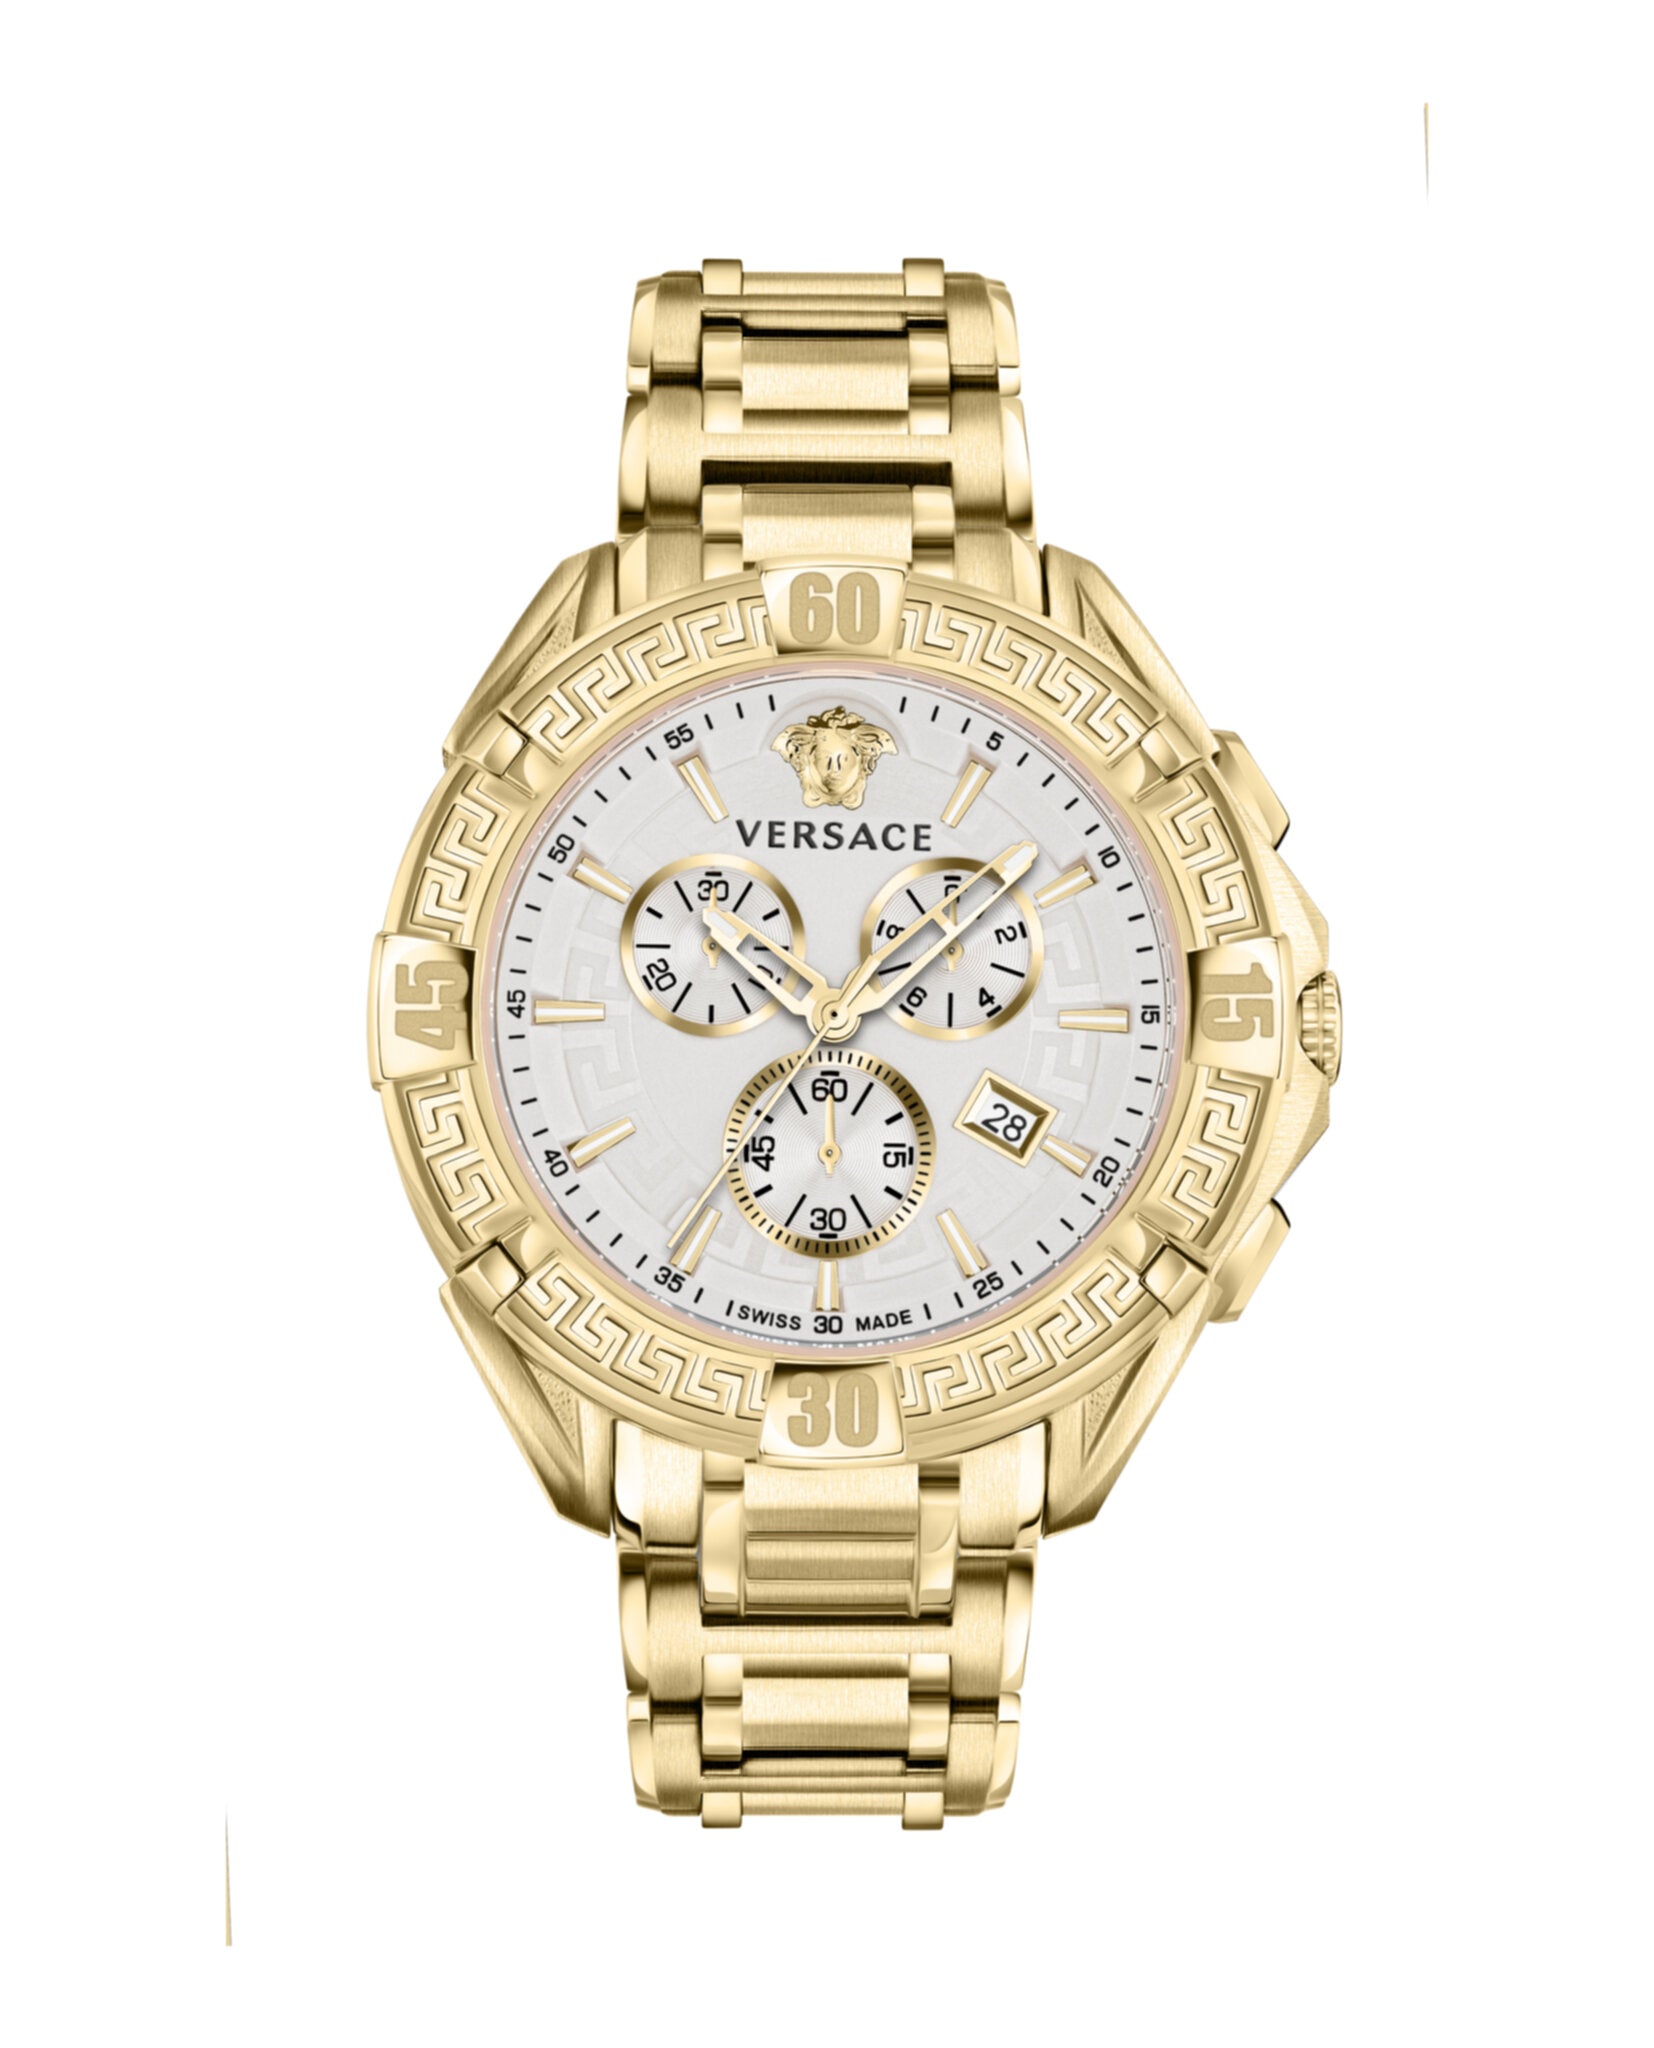 Versace Mens V-Greca Chrono Watches | MadaLuxe Time – Madaluxe Time